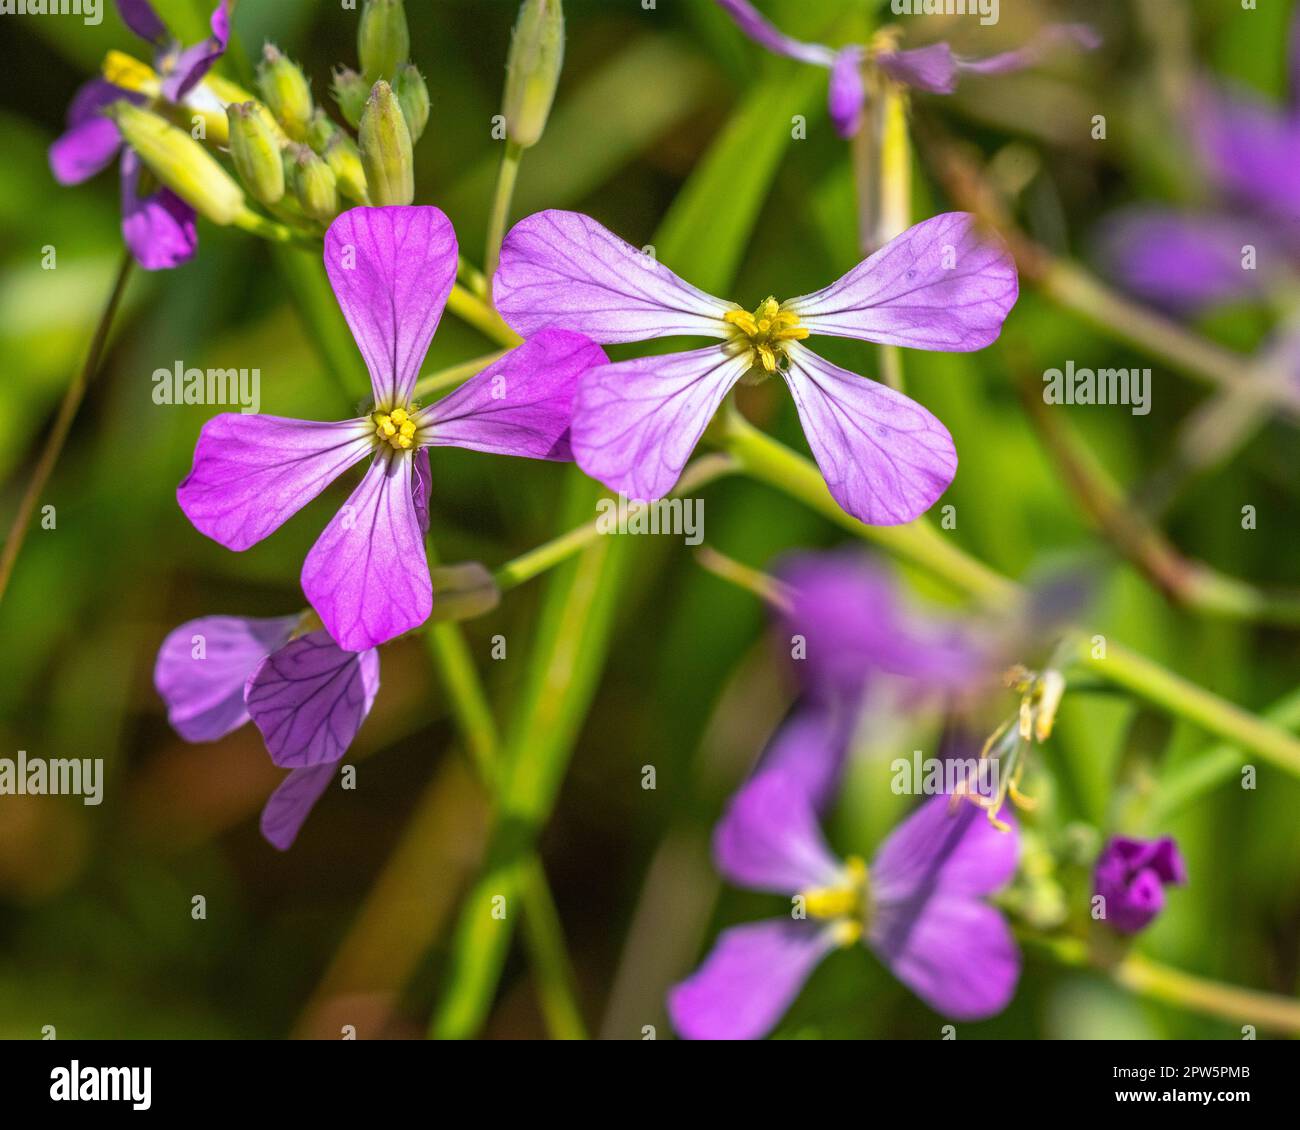 Close up of a blooming flower from a Wild Radish (Raphanus sativus) plant at Lake Hollywood reservoir in Los Angeles, CA. Stock Photo